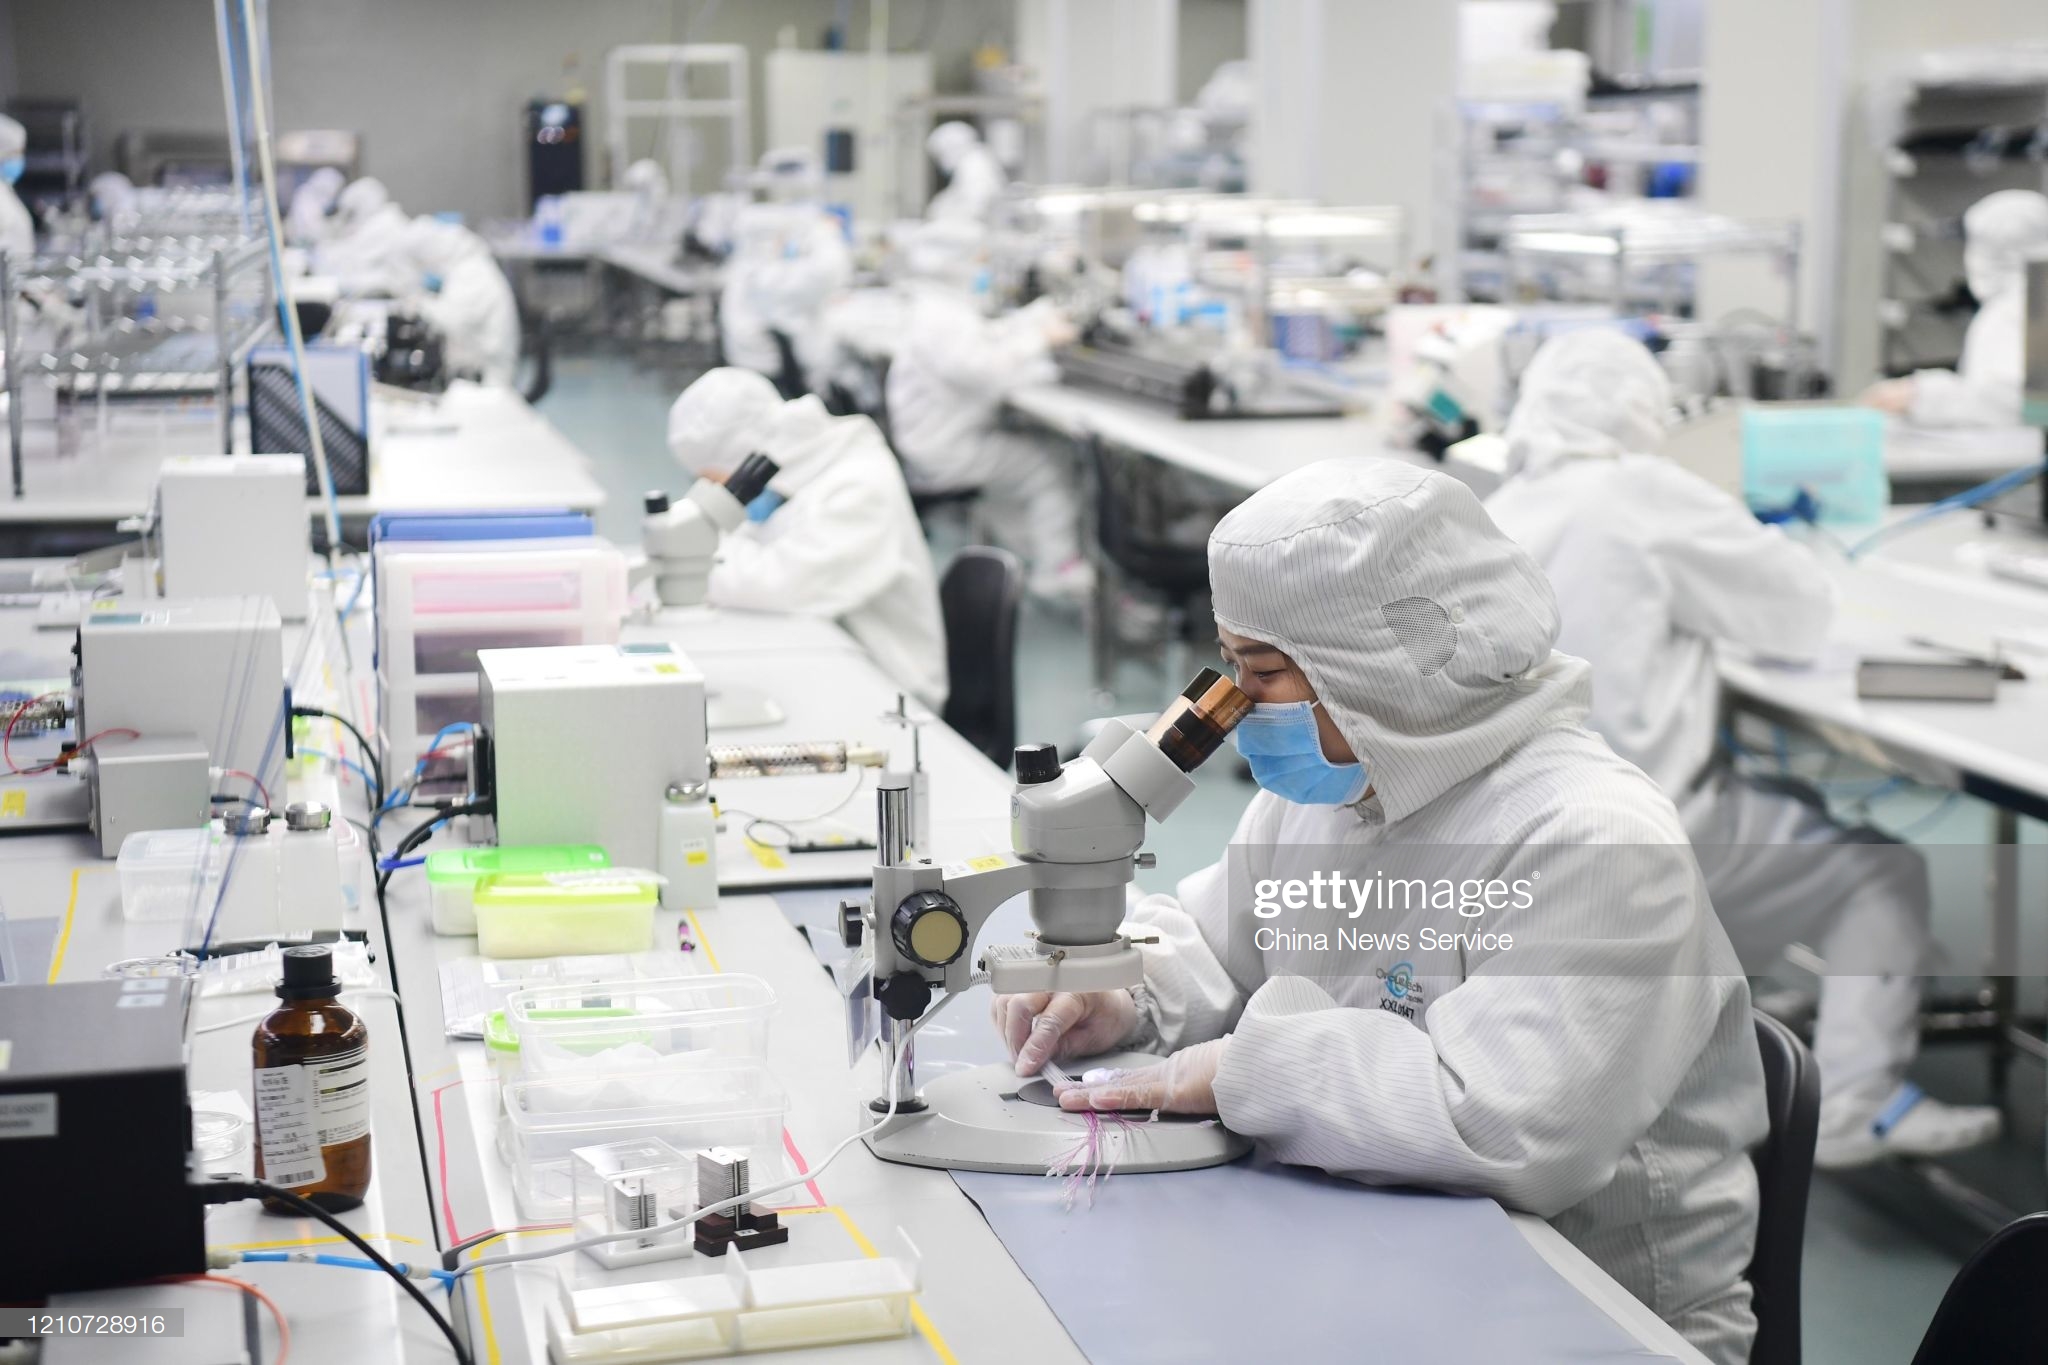 employees-wearing-protective-suits-work-at-orbusneich-medical-co-ltd-picture-id1210728916